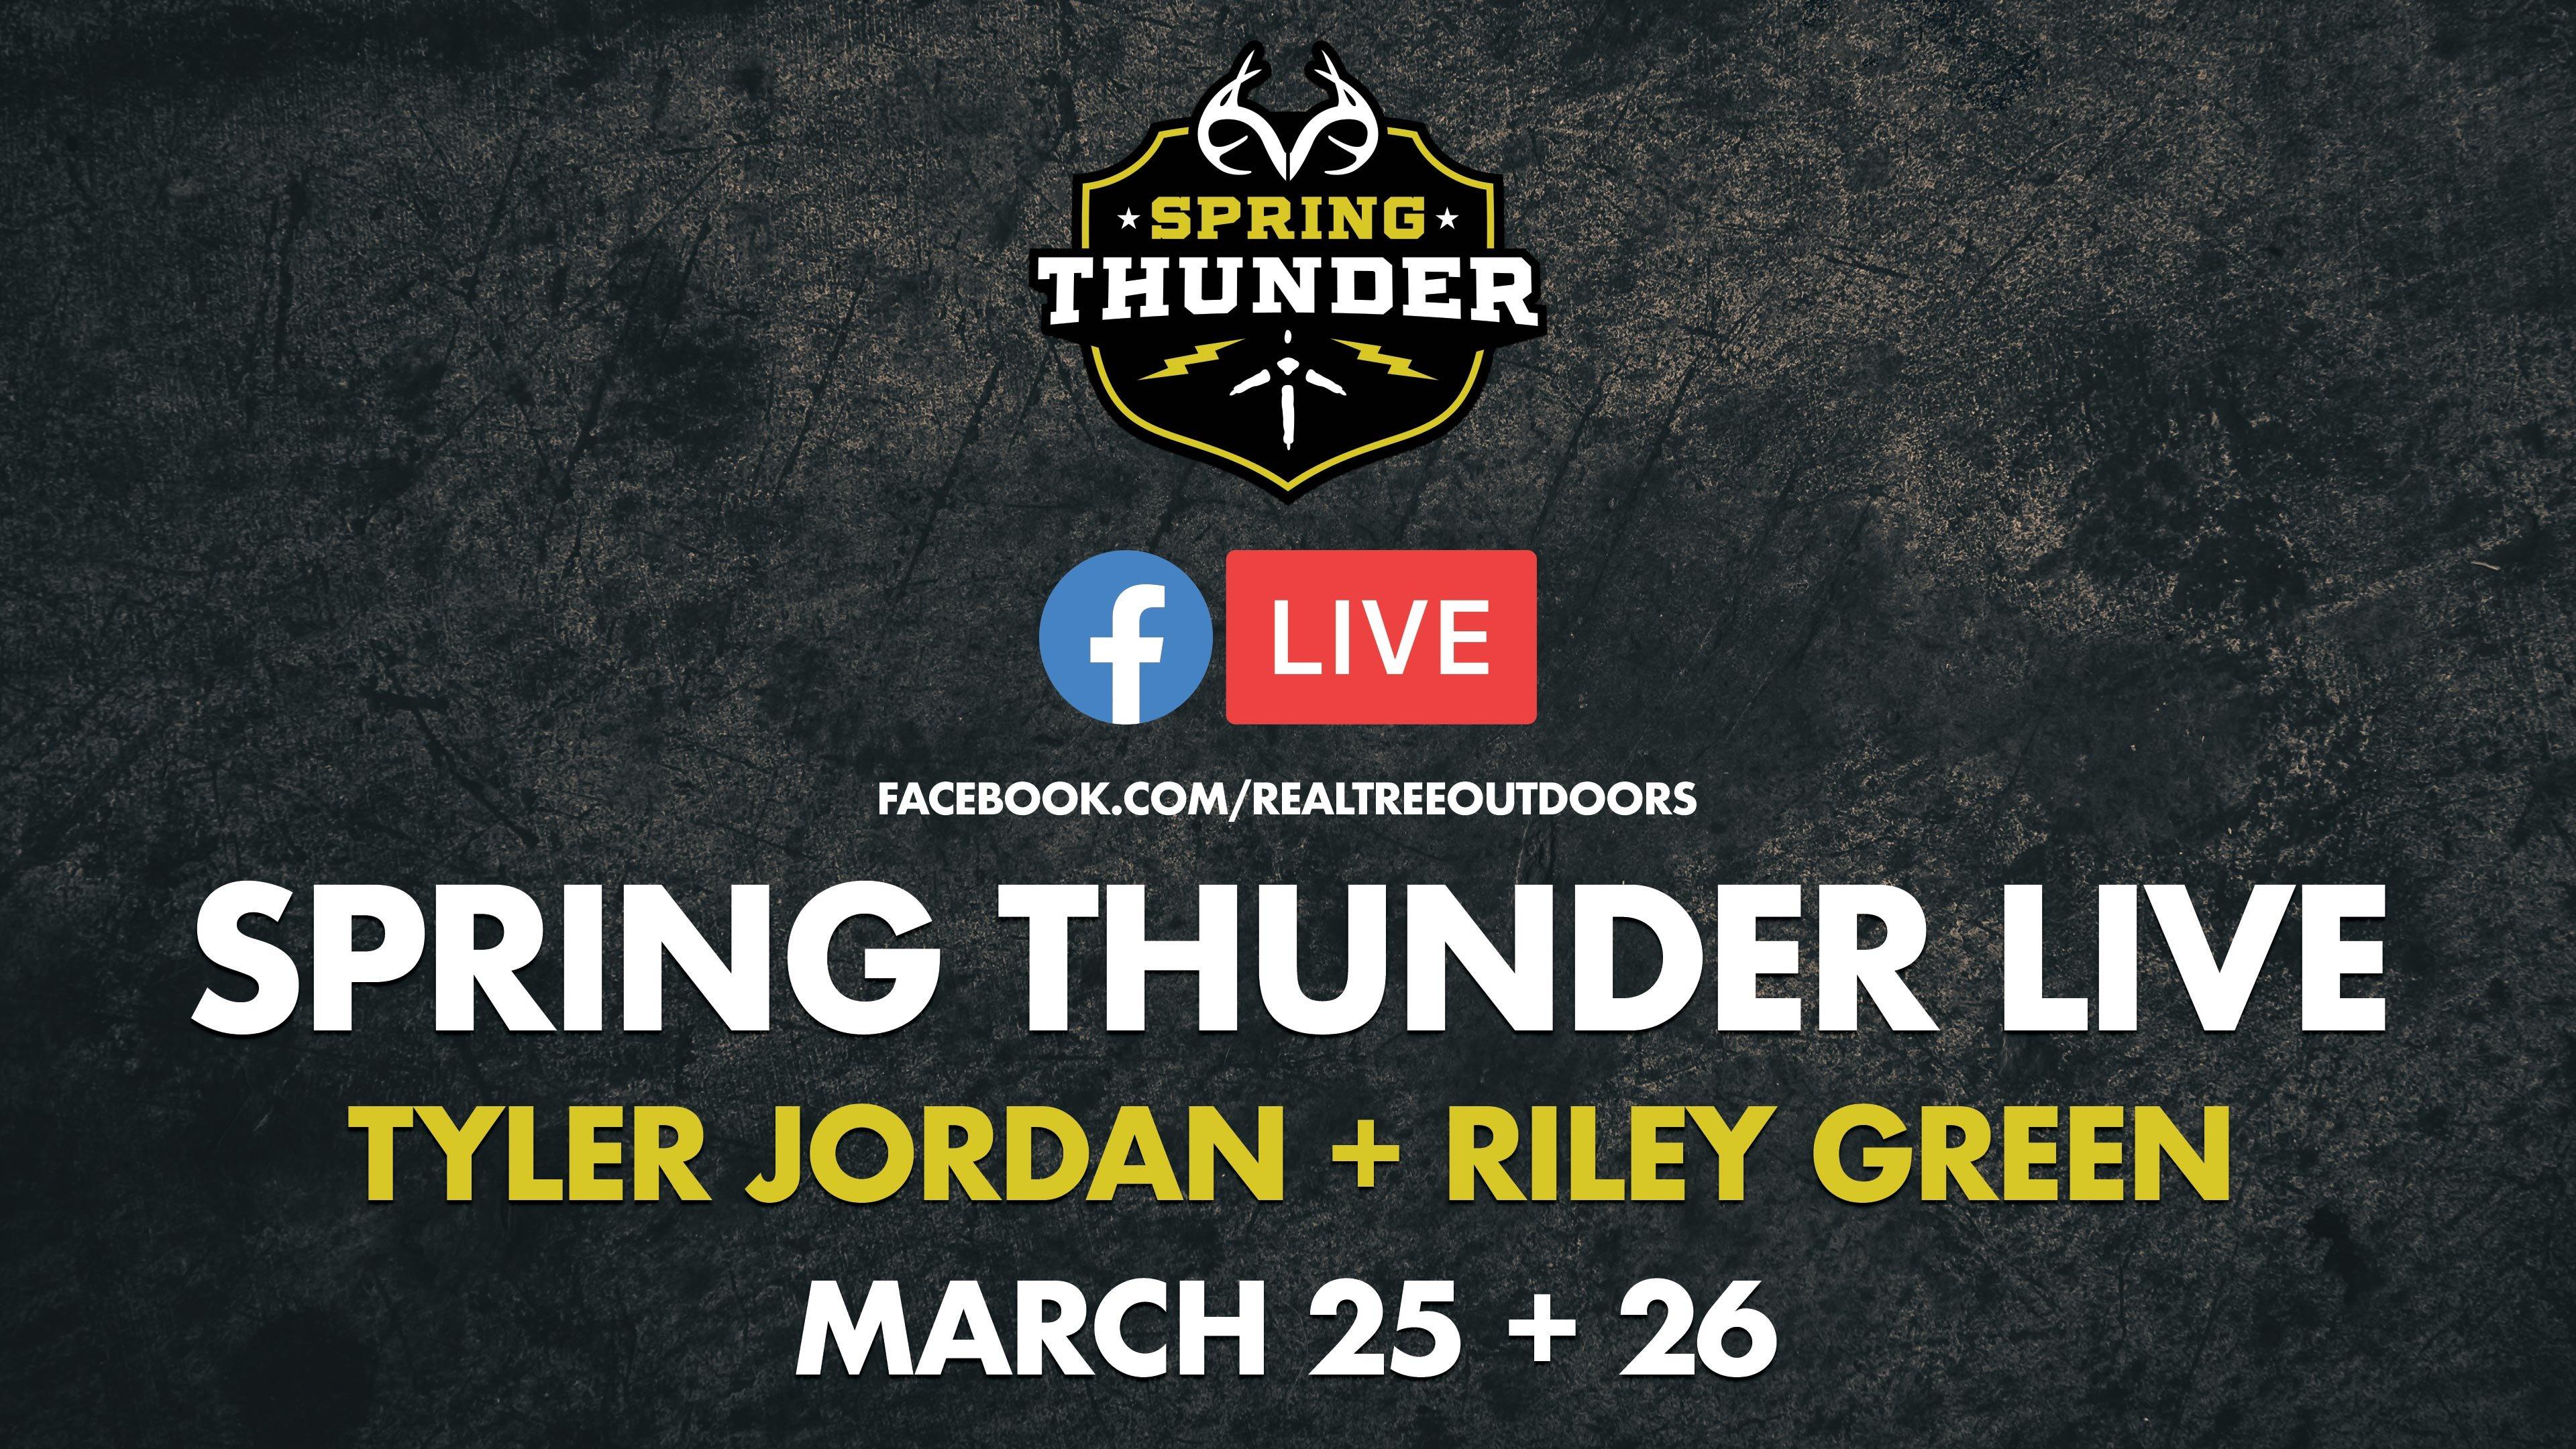 Join live hunts from Realtree's Spring Thunder this week on Facebook ... see you there